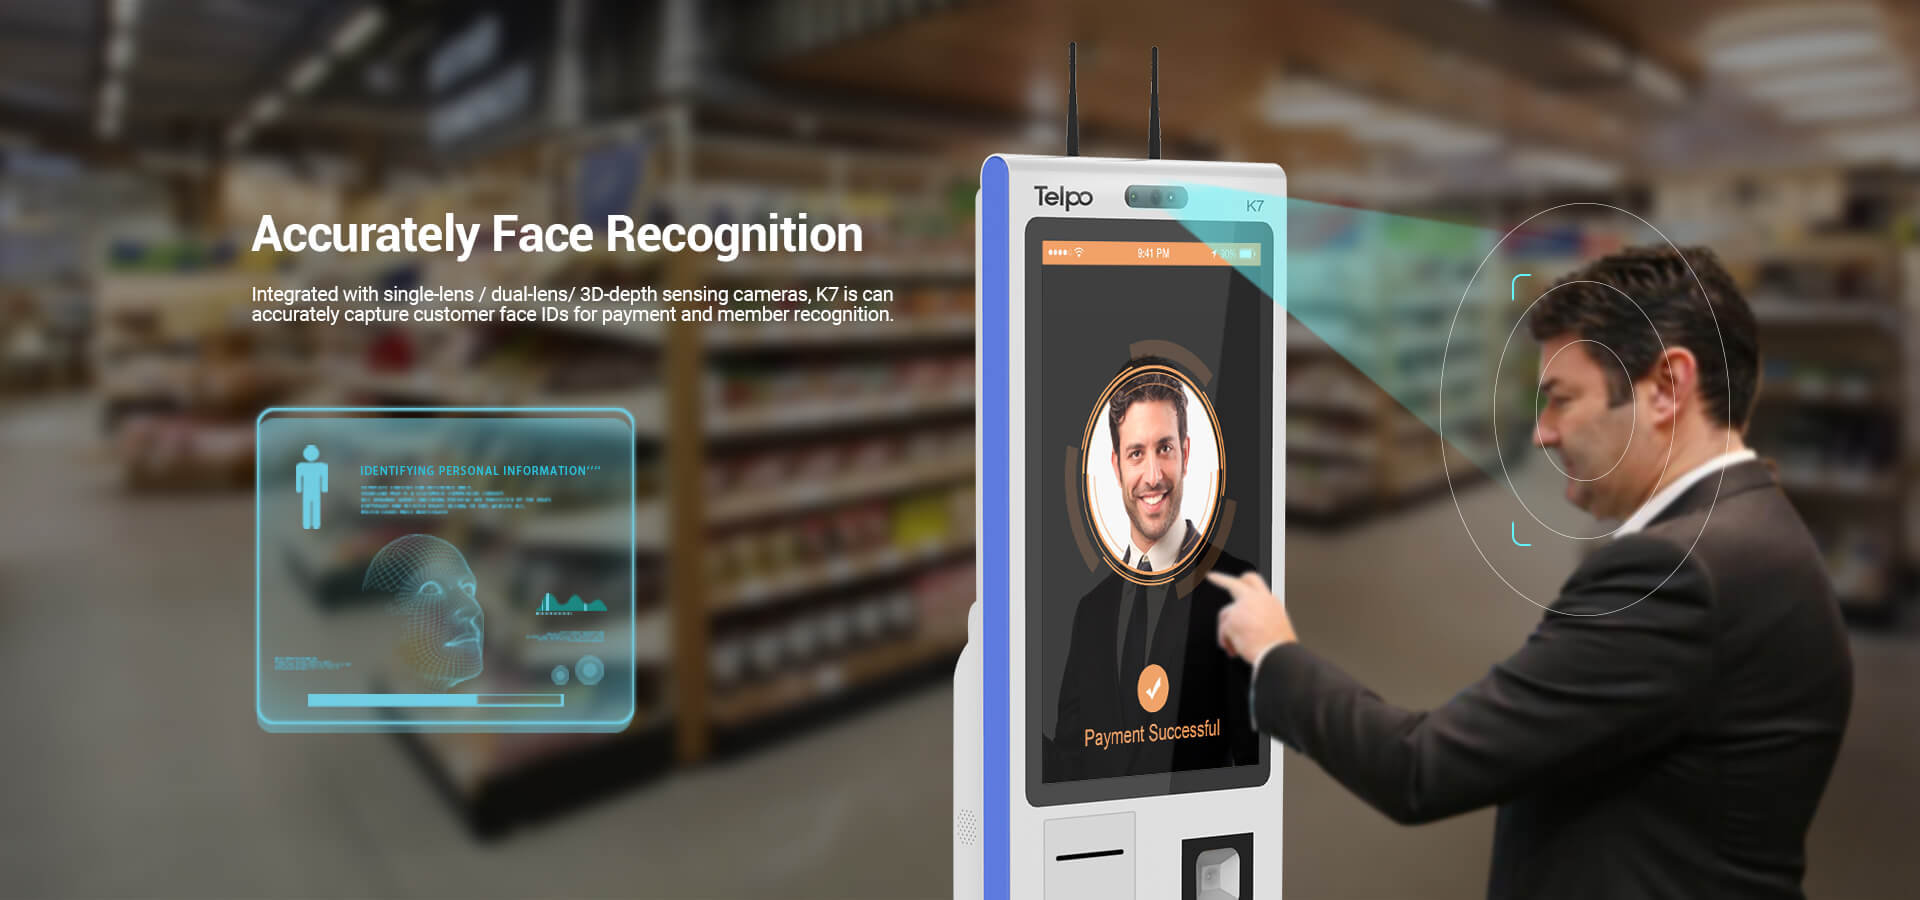 Accurately Face Recognition self checkout kiosk Telpo K7